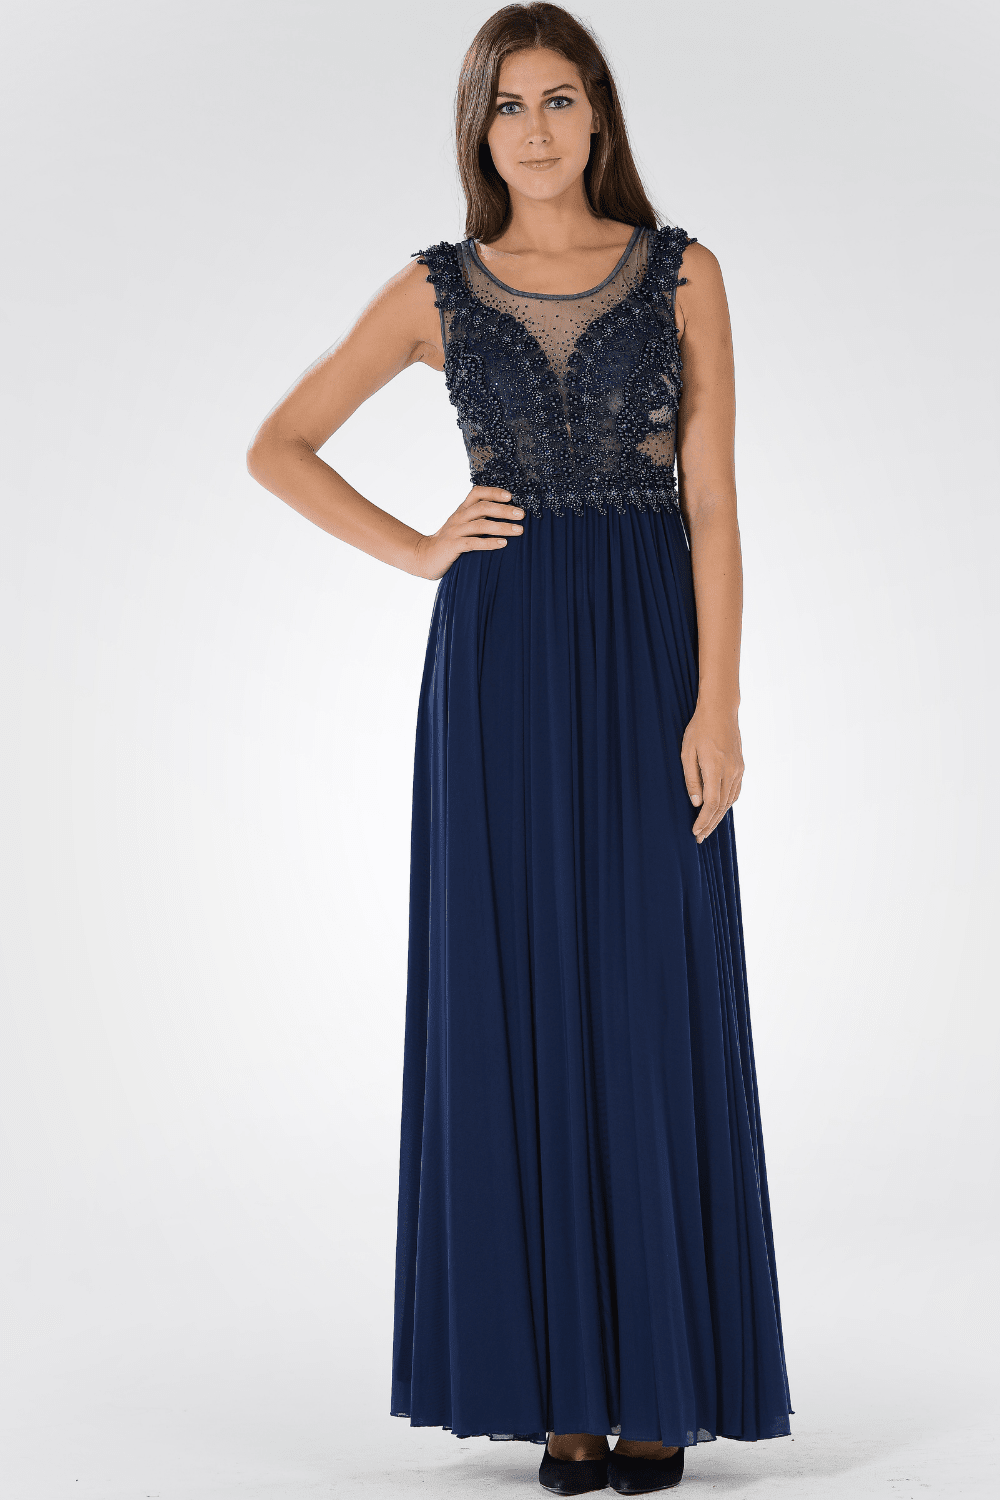 Long Illusion Dress with Beaded Bodice by Poly USA 7516